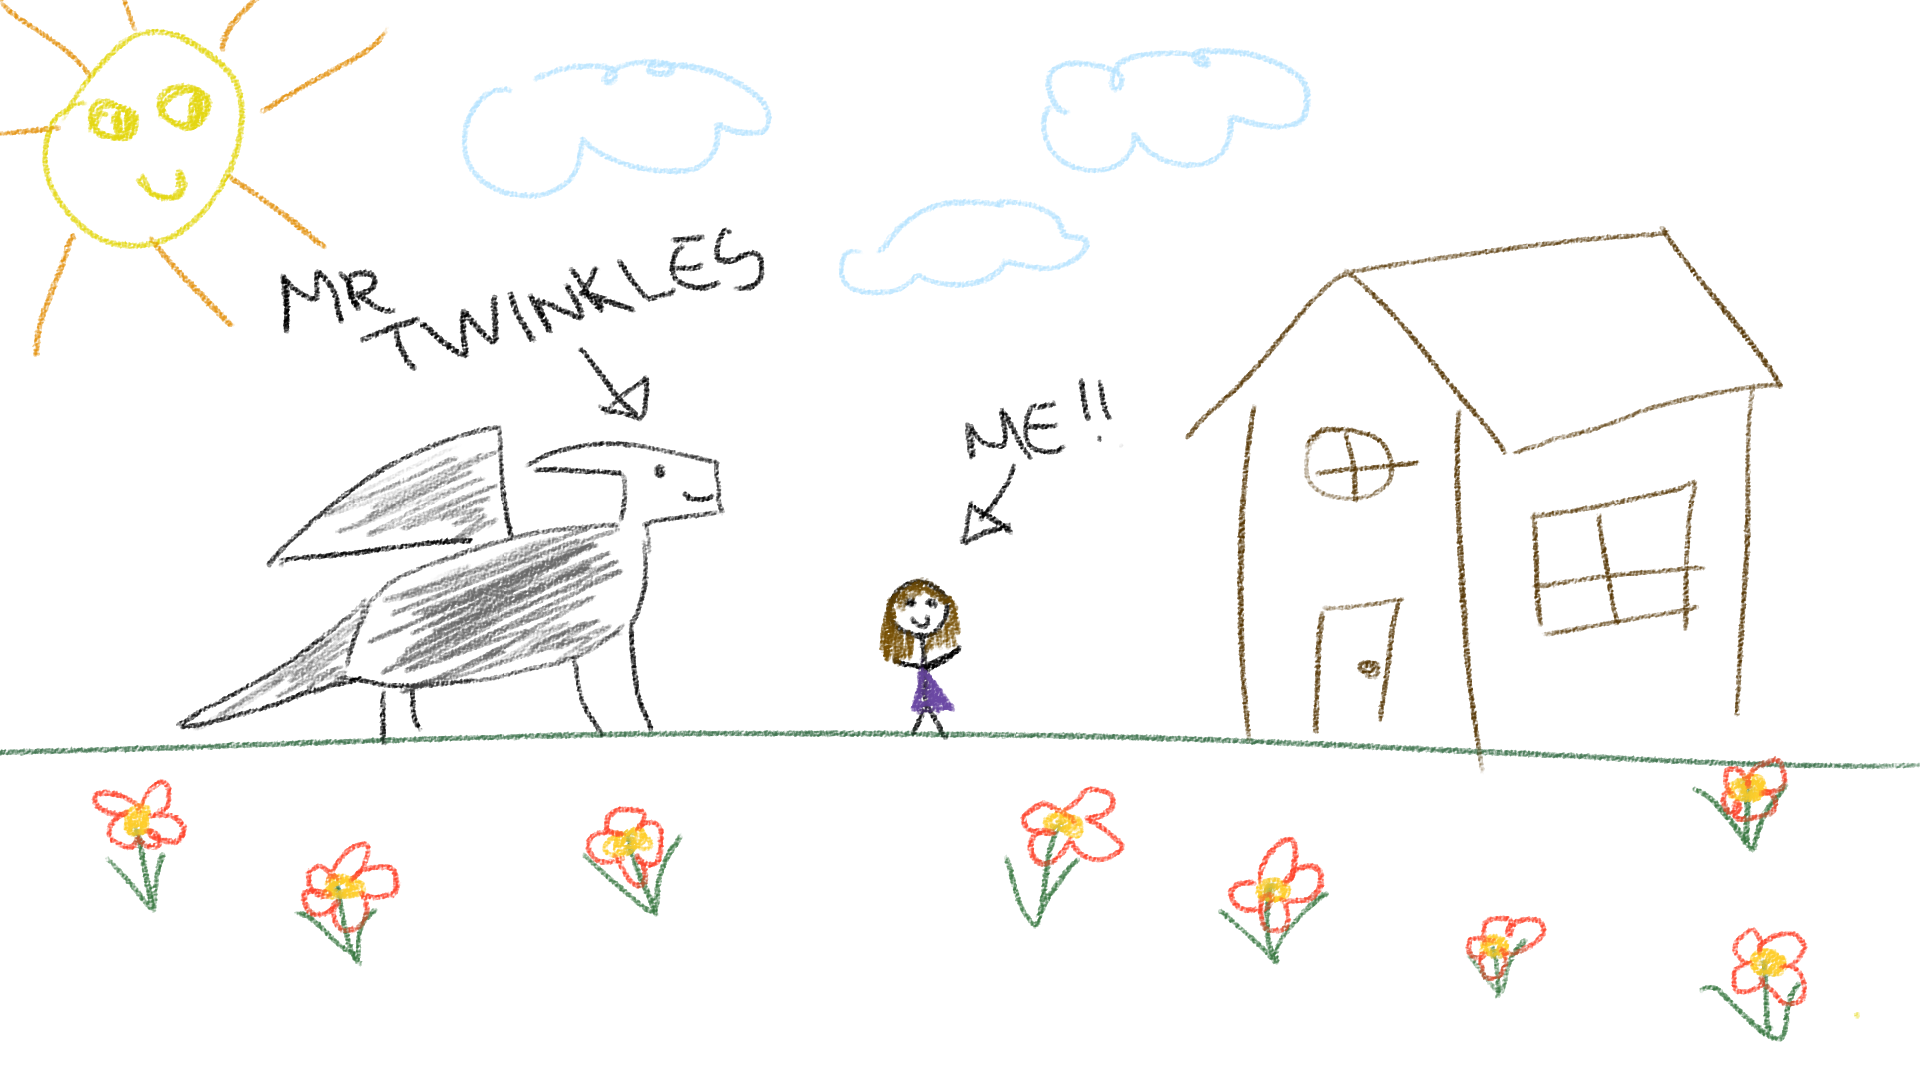 twinkles_drawing_by_juhcmoraes-daor0zh.png